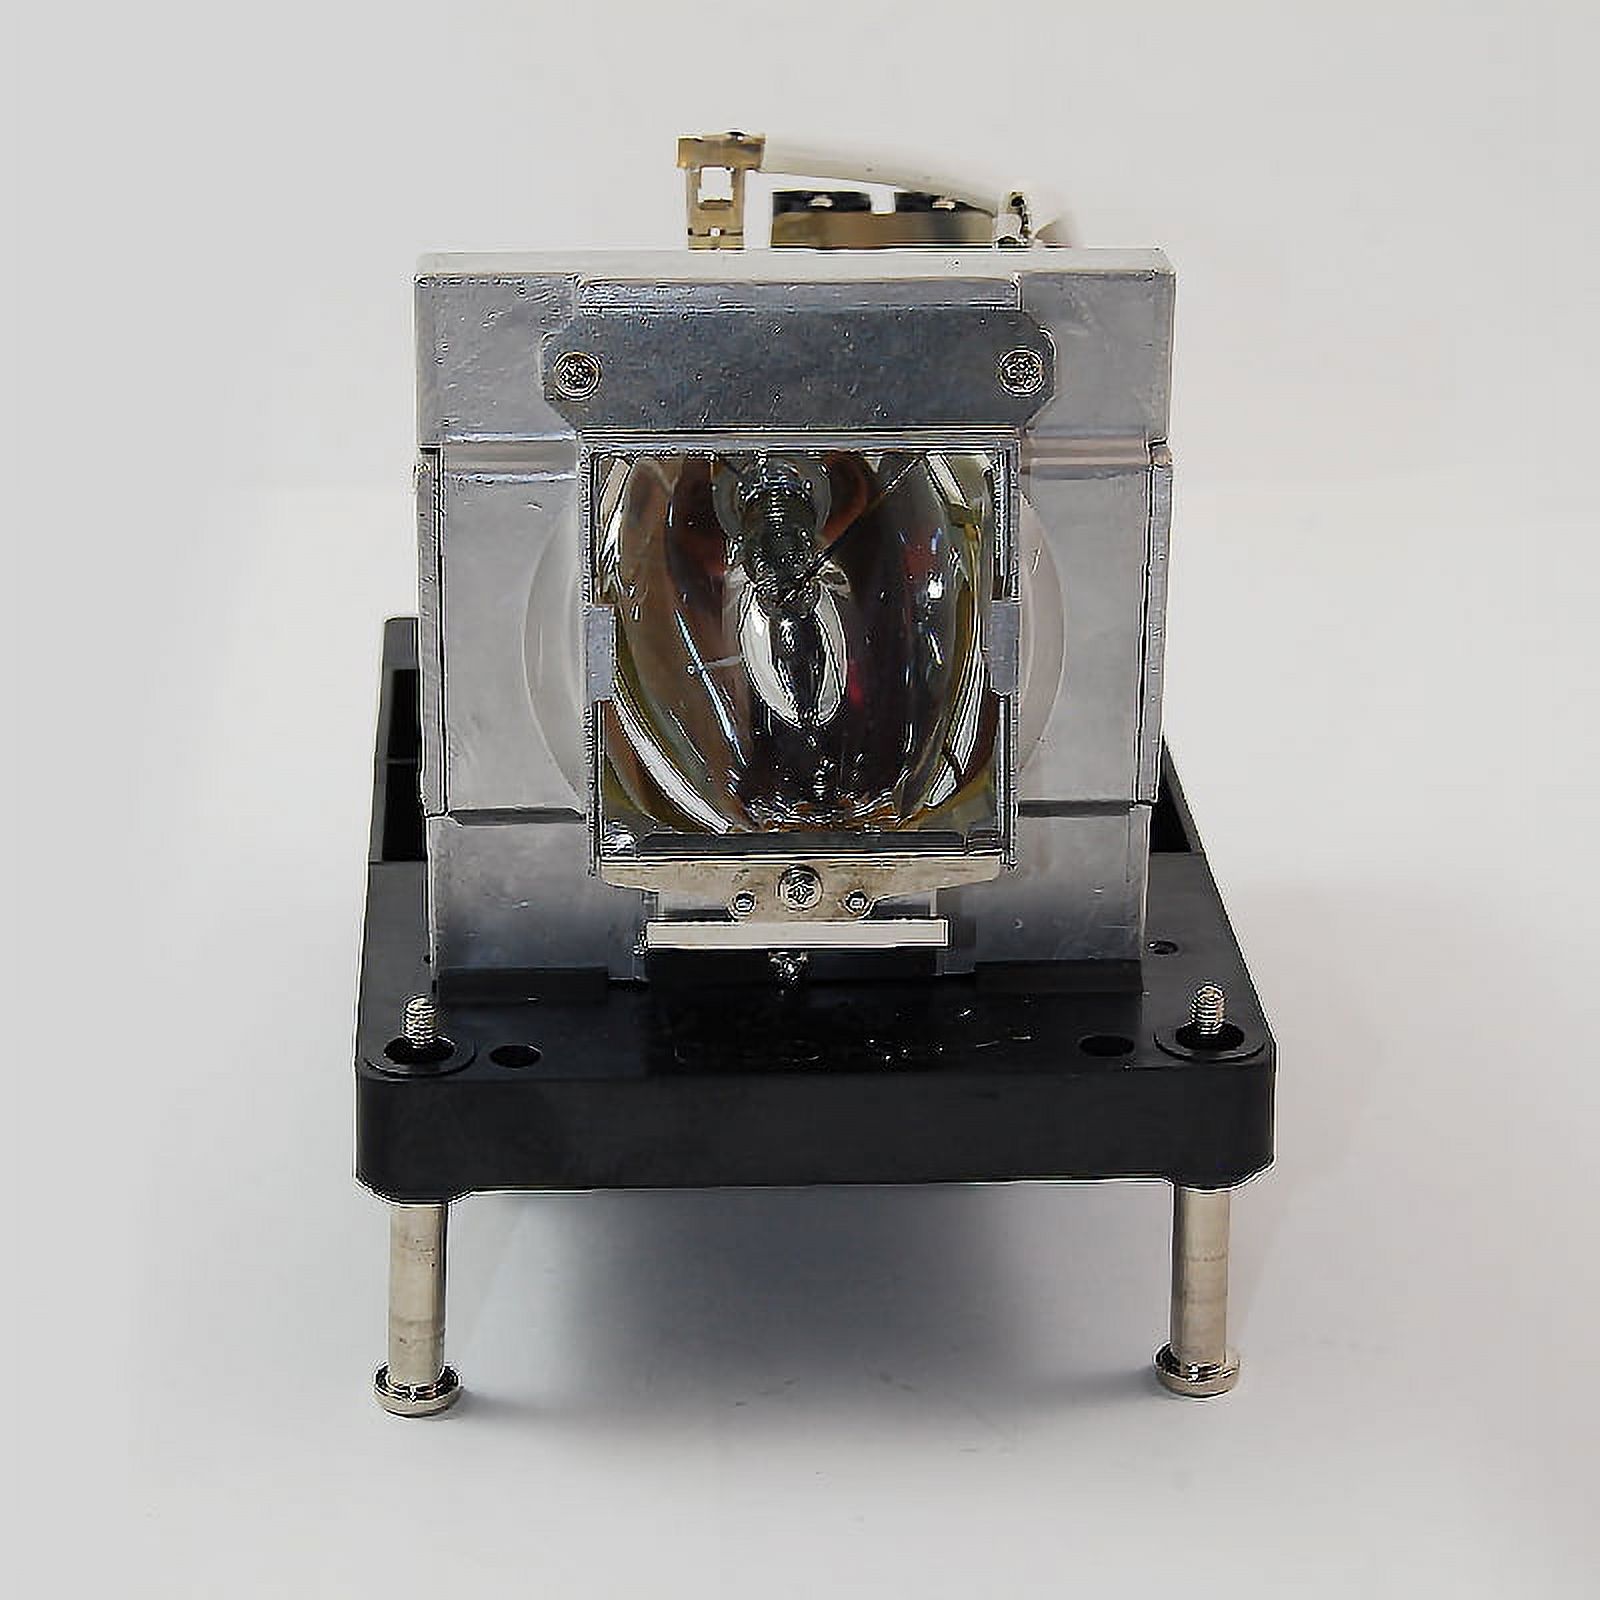 Infocus IN5555L Projector Housing with Genuine Original OEM Bulb - image 4 of 5